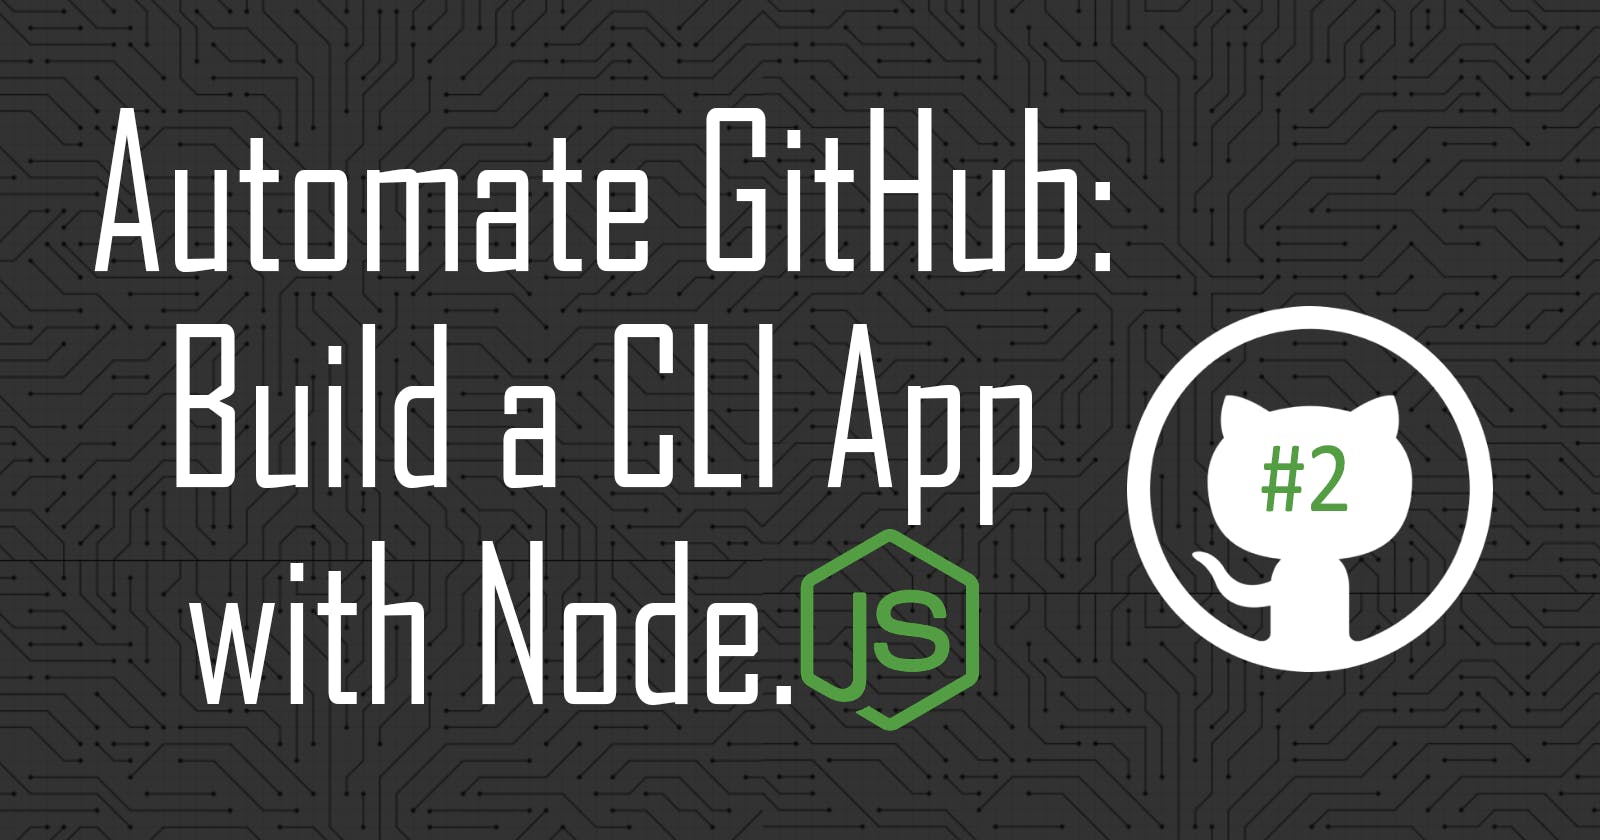 Automate GitHub: Build a CLI App with Node.js #2